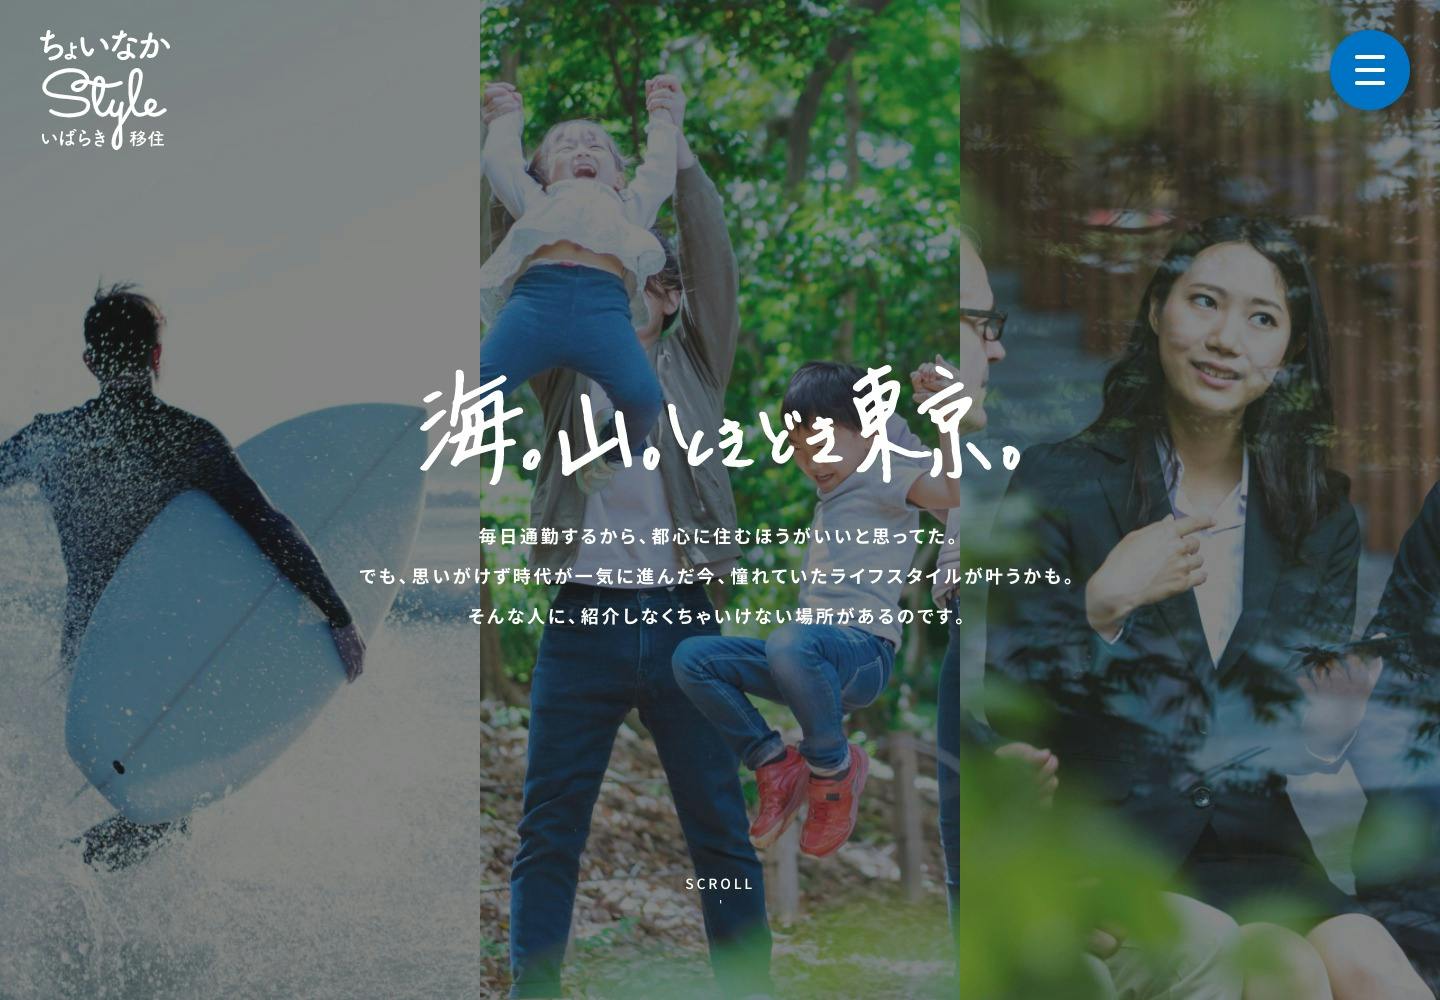 Cover Image for 茨城県の移住情報サイト【公式】ちょいなかStyleいばらき移住